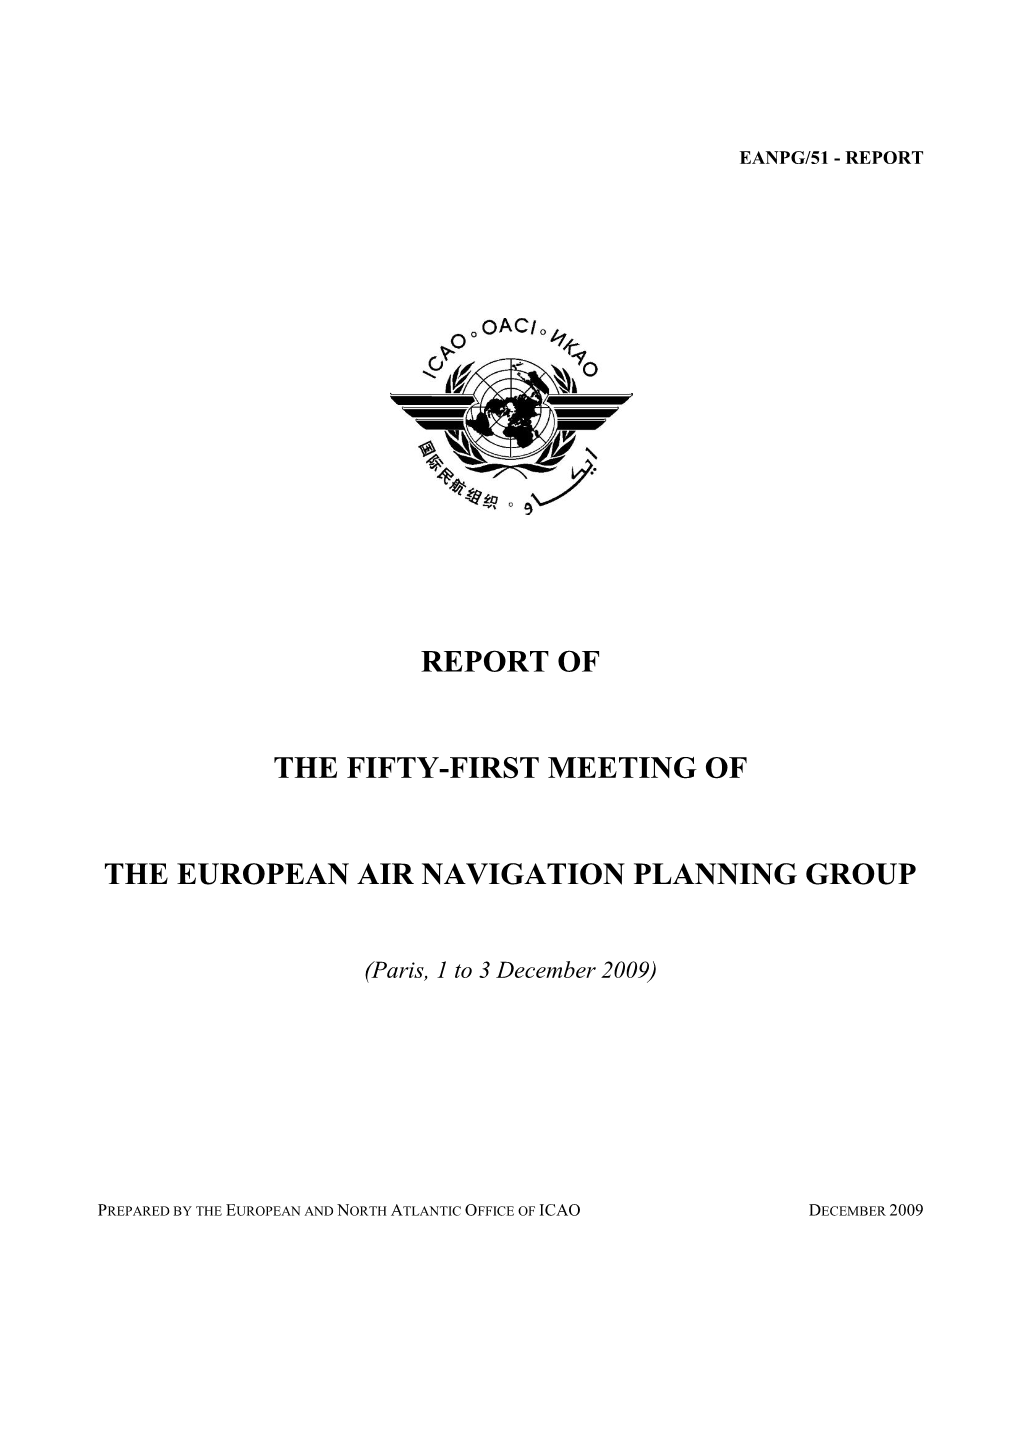 Report of the Fifty-First Meeting of the European Air